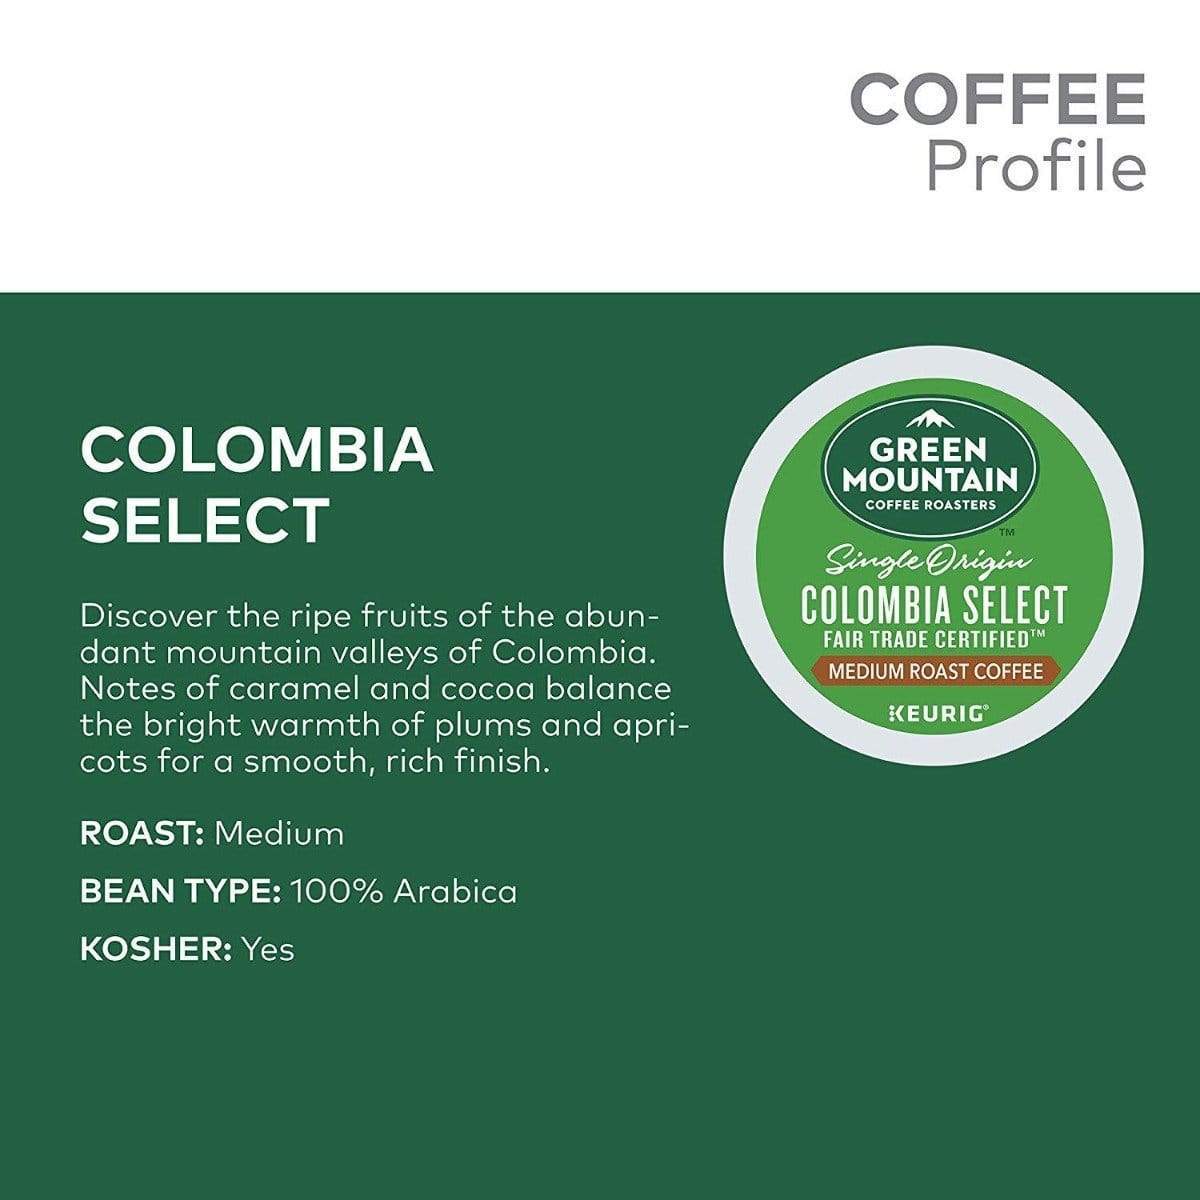 Colombia Fair Trade Coffee Capsules, Colombian Coffee